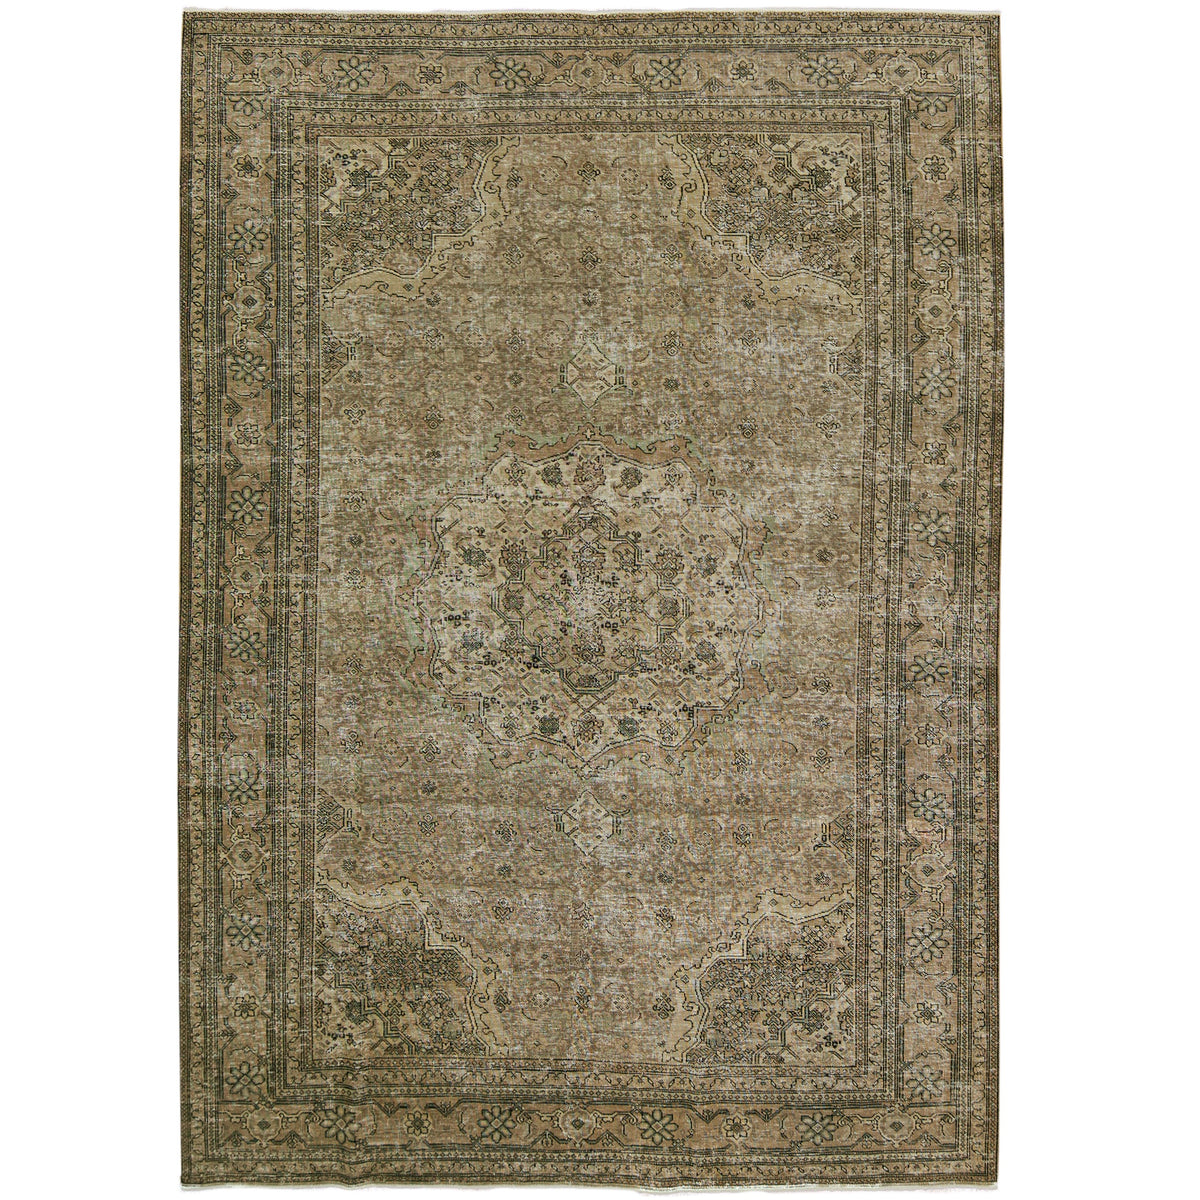 Shoshanna - Elegance Woven with Tradition | Kuden Rugs